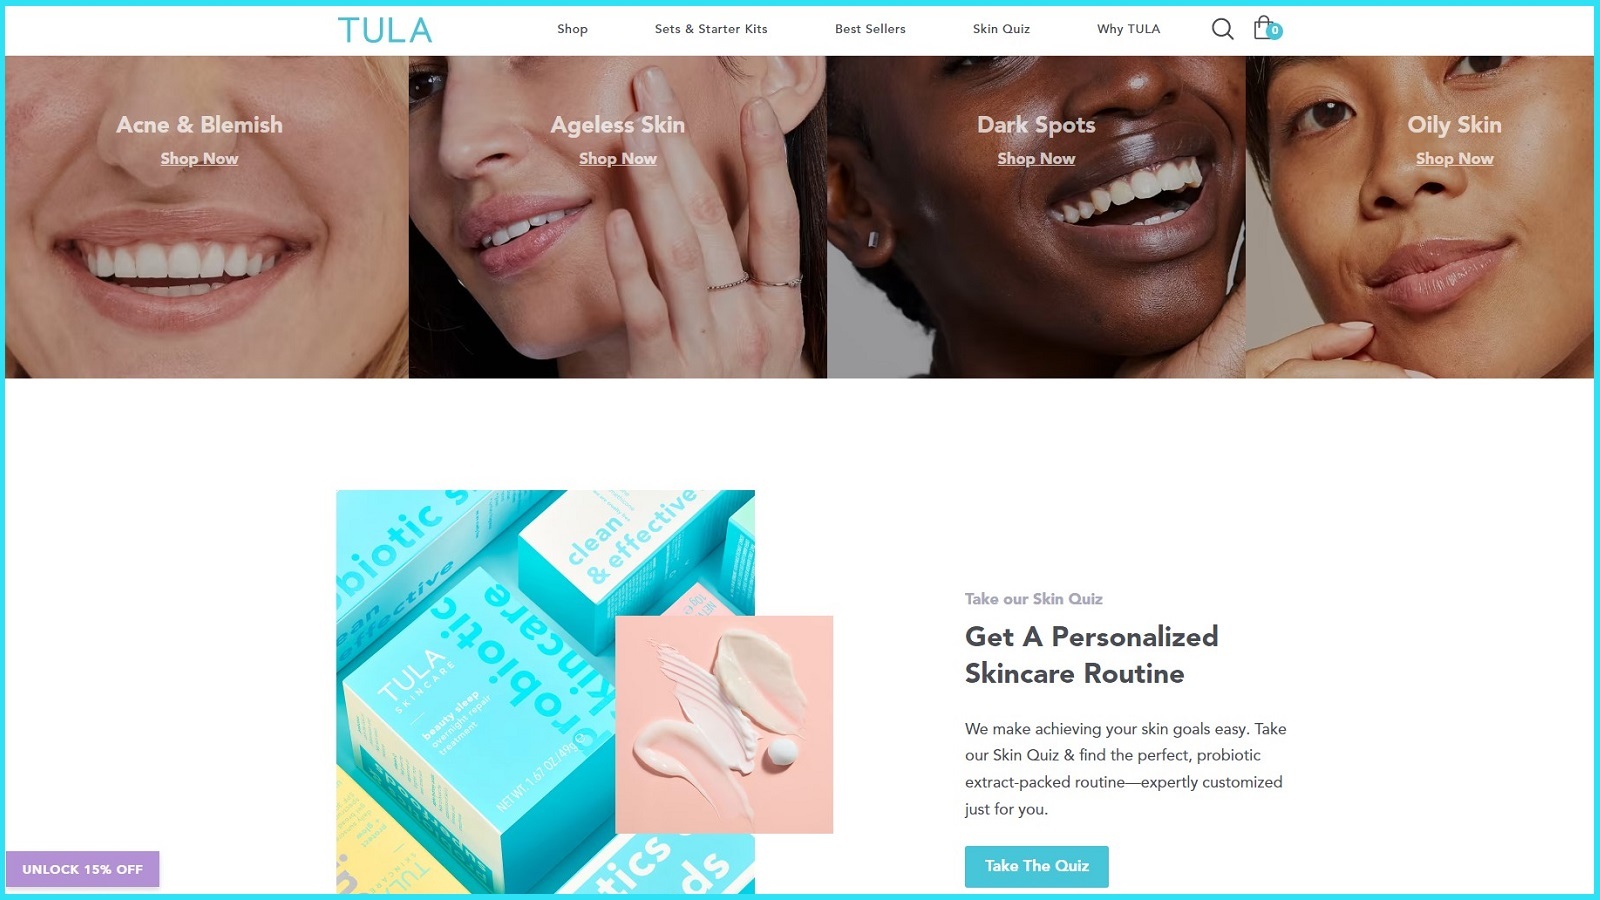 Tula Skincare Review: Should You Buy It for Your Skin?